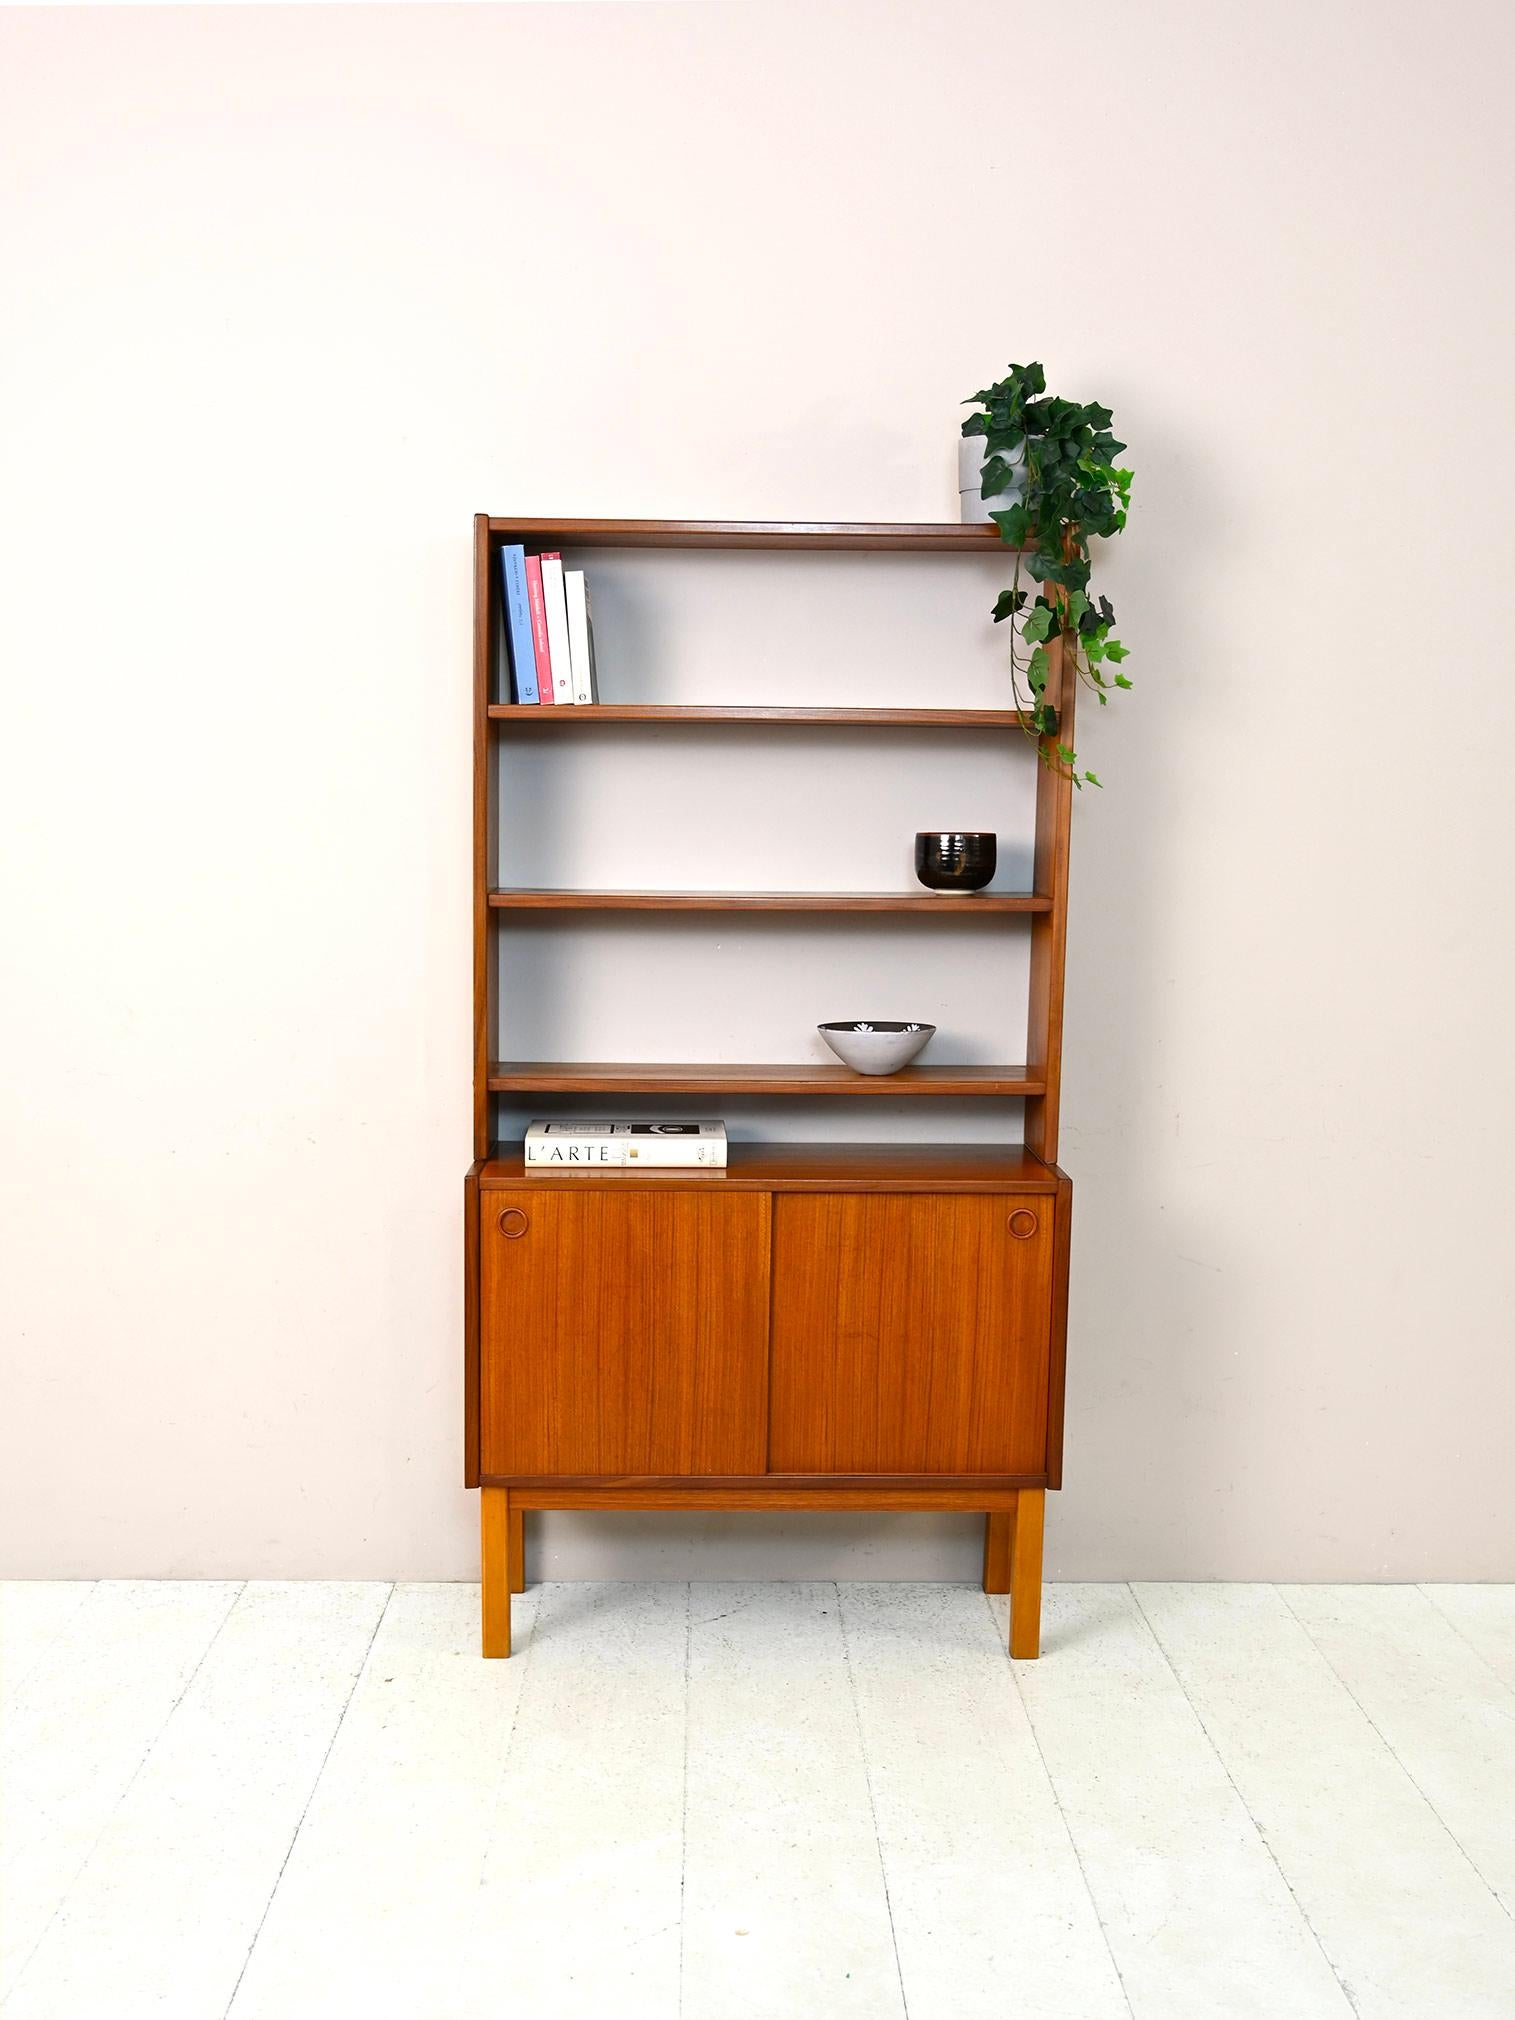 Scandinavian vintage cabinet with shelving.

A functional modernist piece of furniture with simple, minimal lines.
Consists of a small sideboard with sliding doors on which rests a shelving system with adjustable height.
A bookcase with small